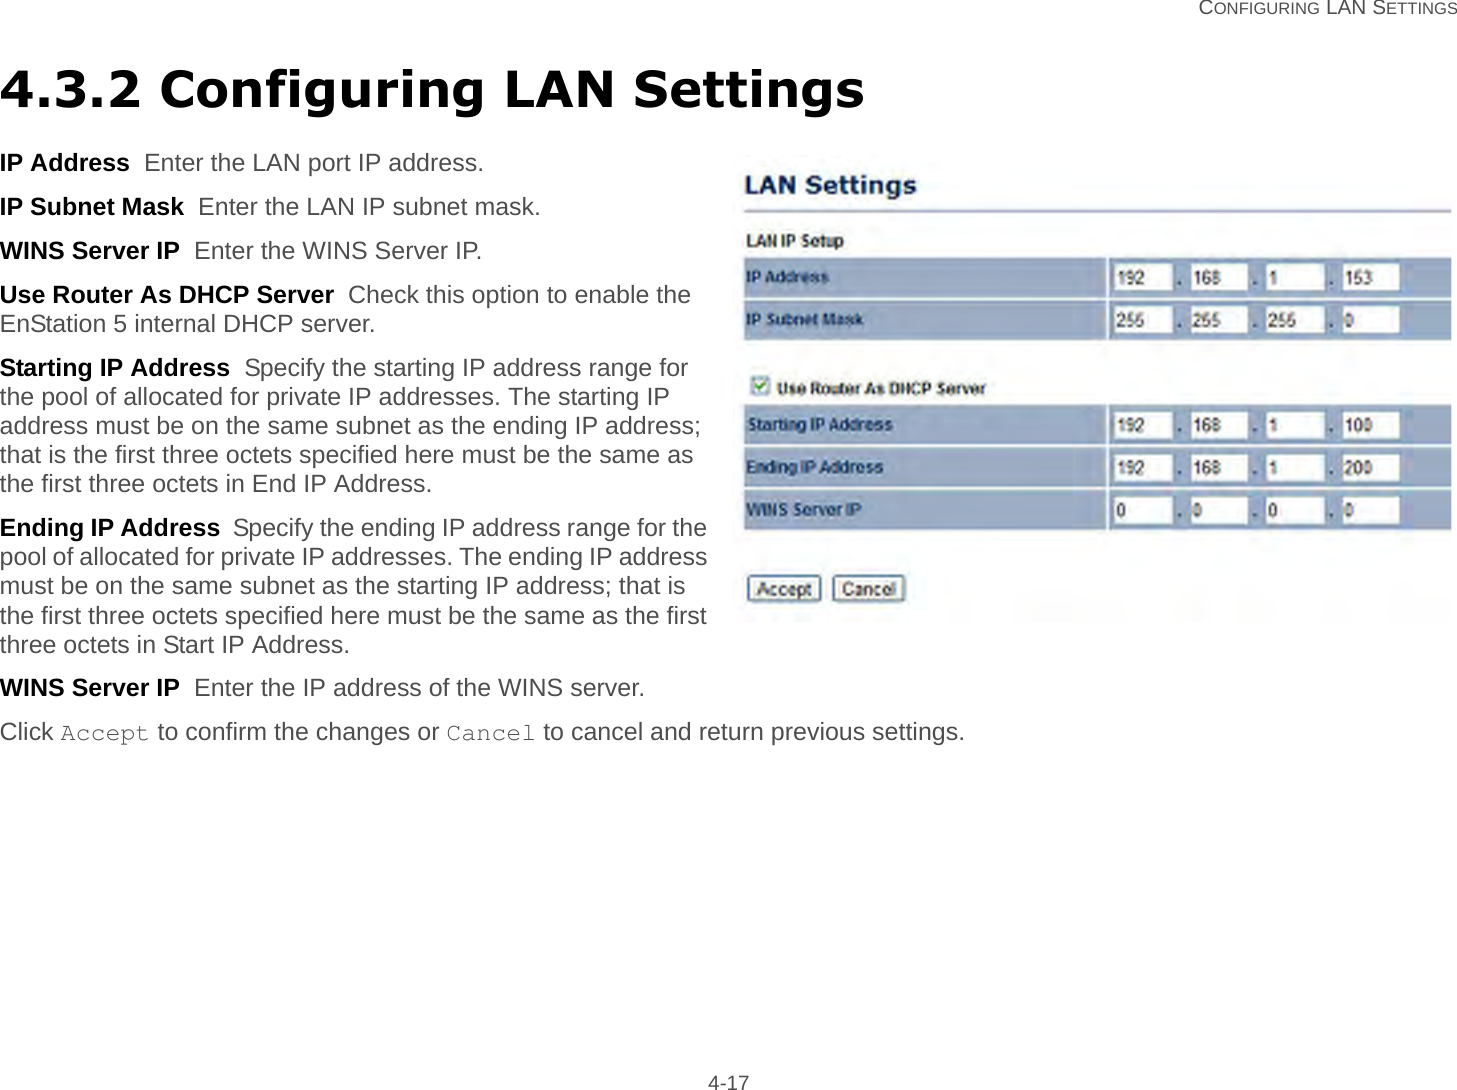   CONFIGURING LAN SETTINGS 4-174.3.2 Configuring LAN SettingsIP Address  Enter the LAN port IP address.IP Subnet Mask  Enter the LAN IP subnet mask.WINS Server IP  Enter the WINS Server IP.Use Router As DHCP Server  Check this option to enable the EnStation 5 internal DHCP server.Starting IP Address  Specify the starting IP address range for the pool of allocated for private IP addresses. The starting IP address must be on the same subnet as the ending IP address; that is the first three octets specified here must be the same as the first three octets in End IP Address.Ending IP Address  Specify the ending IP address range for the pool of allocated for private IP addresses. The ending IP address must be on the same subnet as the starting IP address; that is the first three octets specified here must be the same as the first three octets in Start IP Address.WINS Server IP  Enter the IP address of the WINS server.Click Accept to confirm the changes or Cancel to cancel and return previous settings.